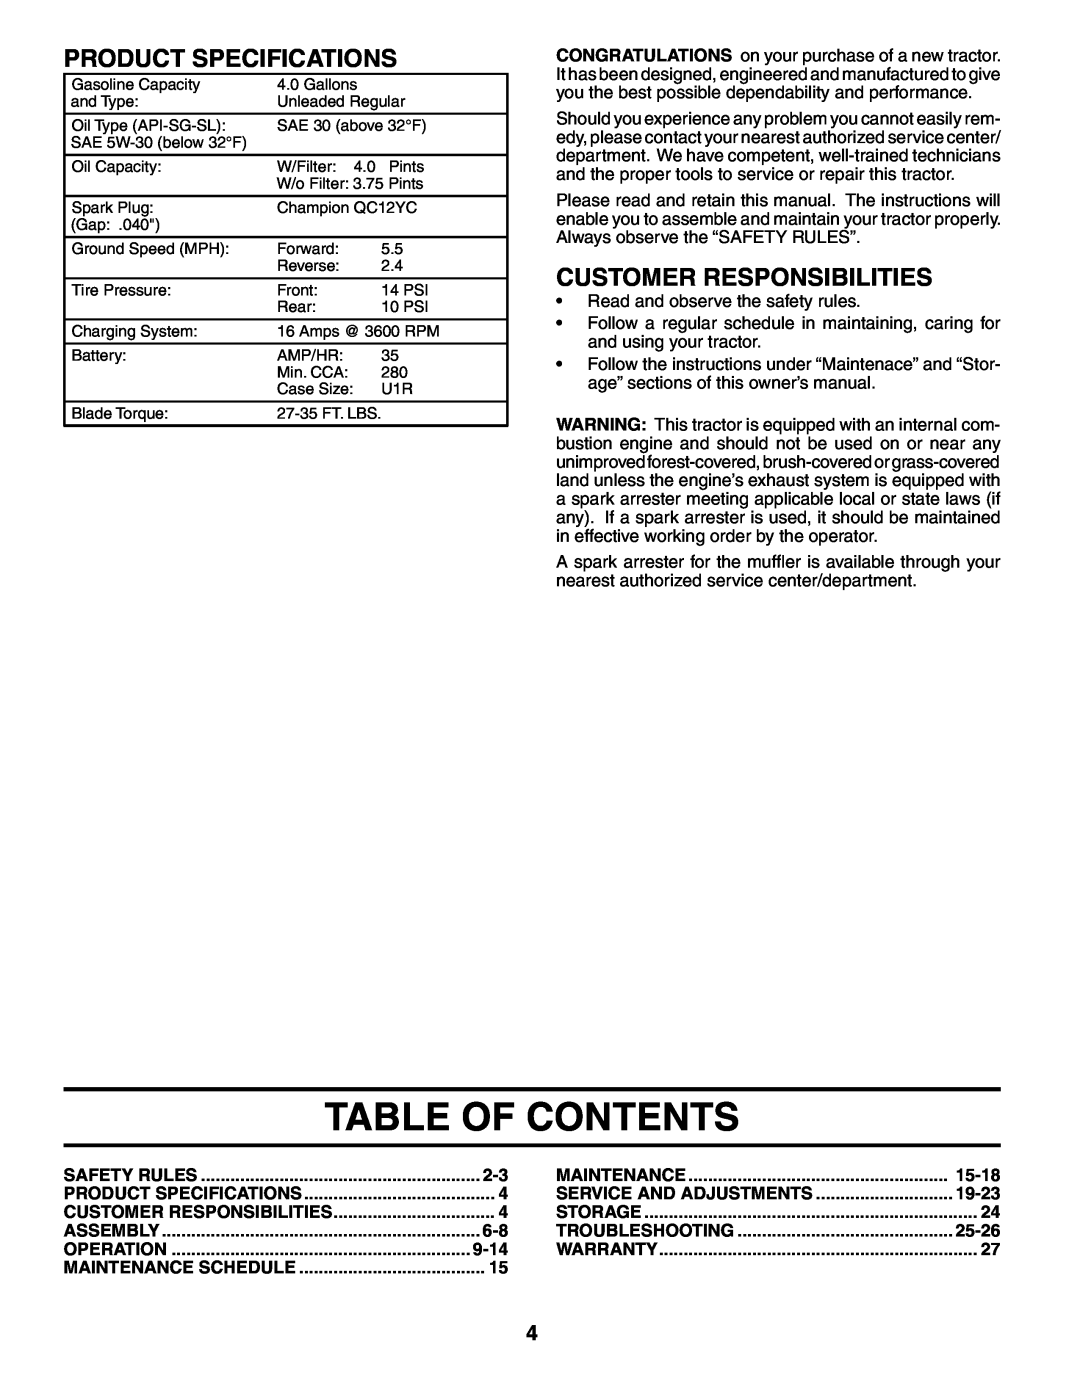 Poulan 195021 manual Table Of Contents, Product Specifications, Customer Responsibilities 